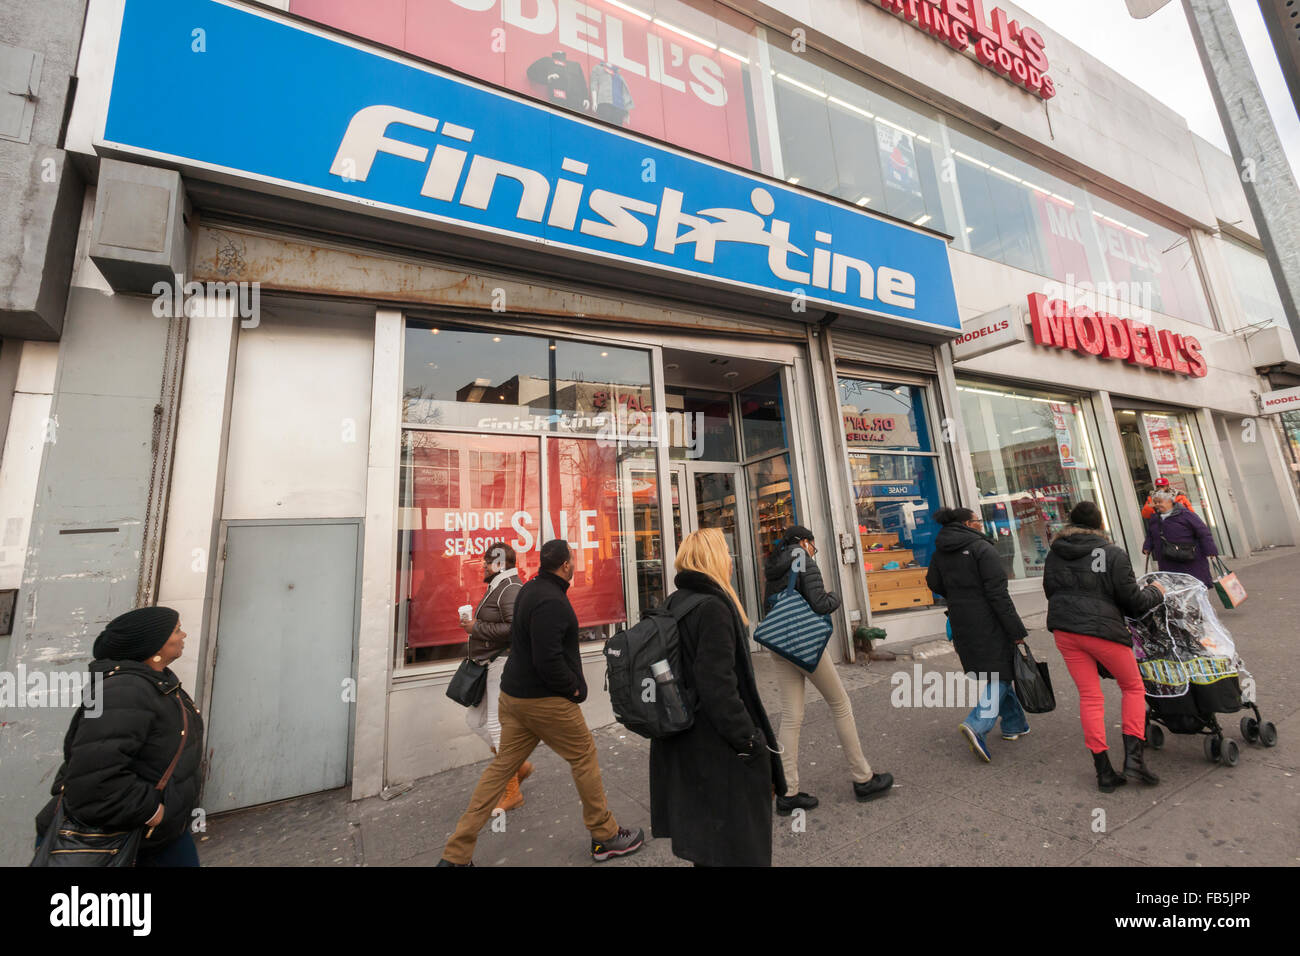 A Finish Line store in the Fordham Road central business district in the Bronx in New York on Thursday, January 7, 2016. The athletic shoe retailer announced that due to a fiscal third quarter loss  the company will close up to 150 stores and replace its CEO. The company cited a supply chain disruption as a one reason.  (© Richard B. Levine) Stock Photo